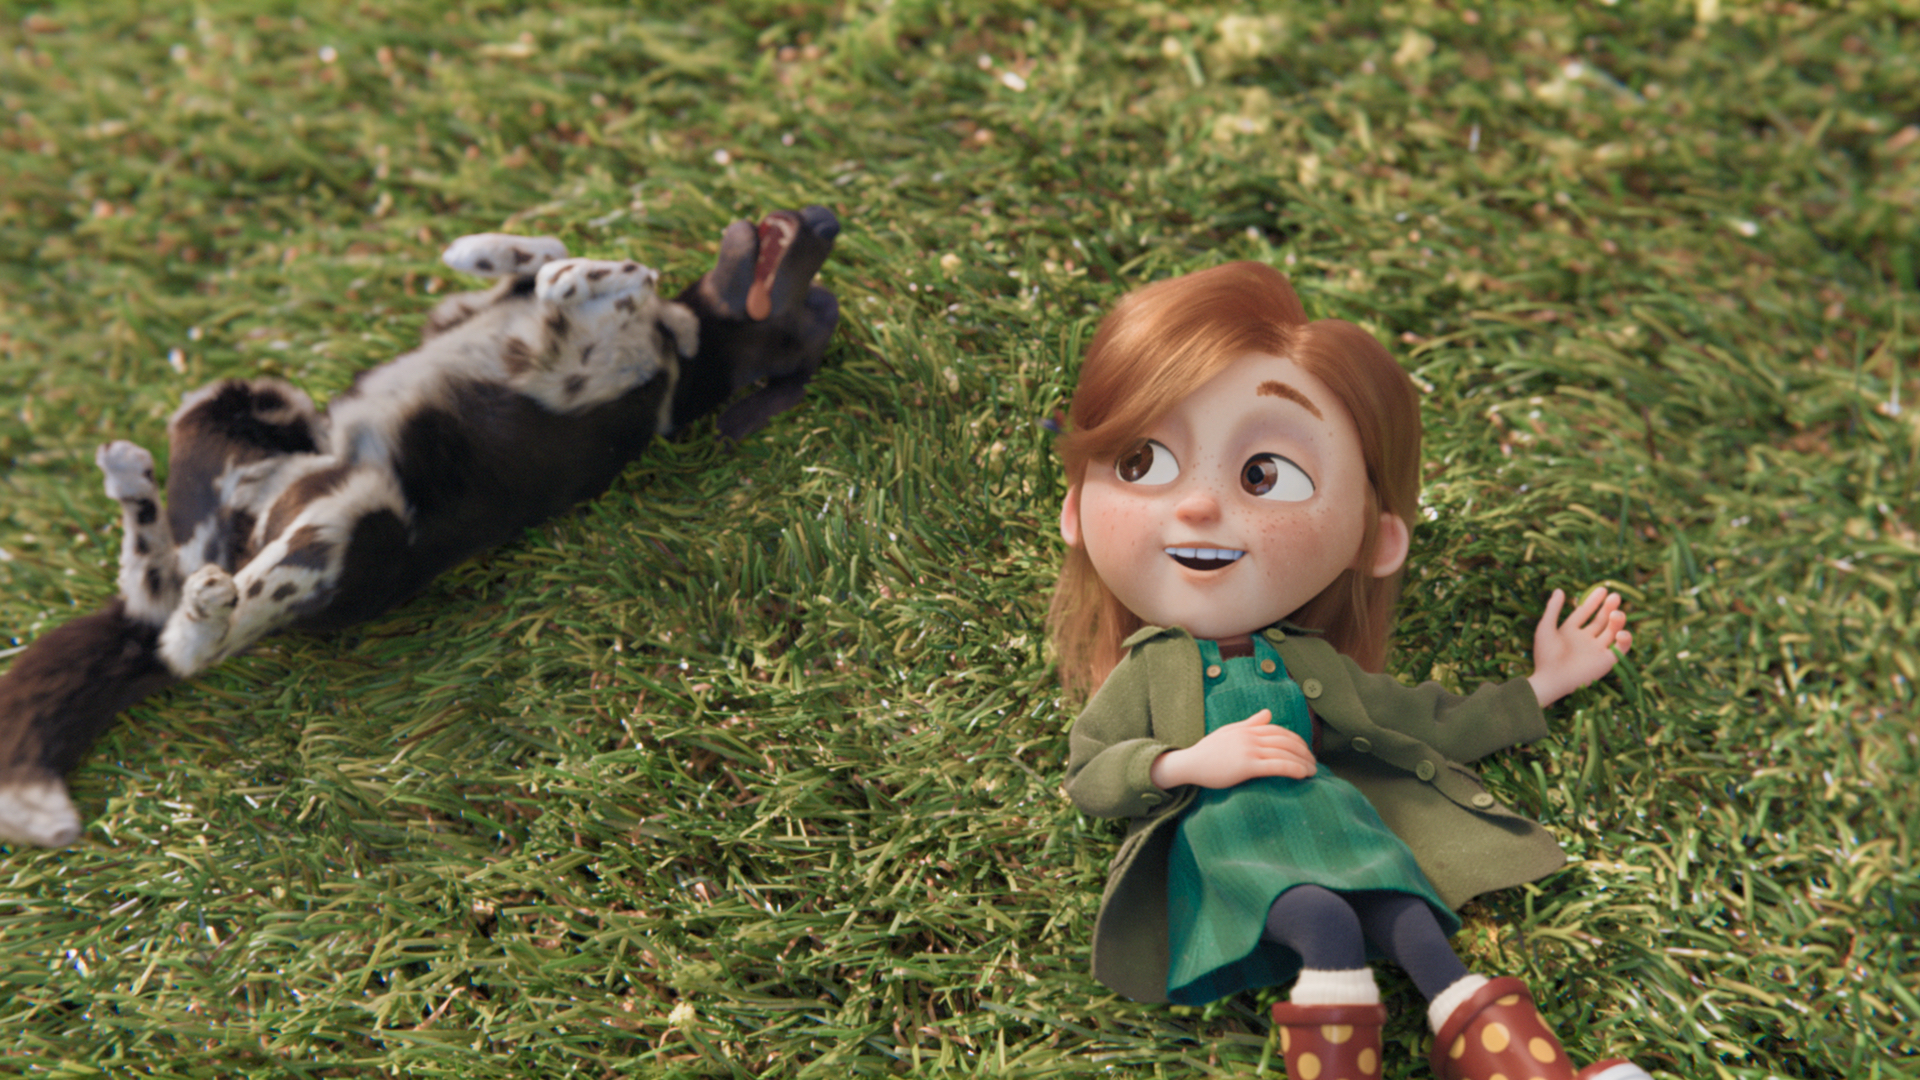 Nature-Loving Daughter Swaps Out Meat in Charming Animated Spot